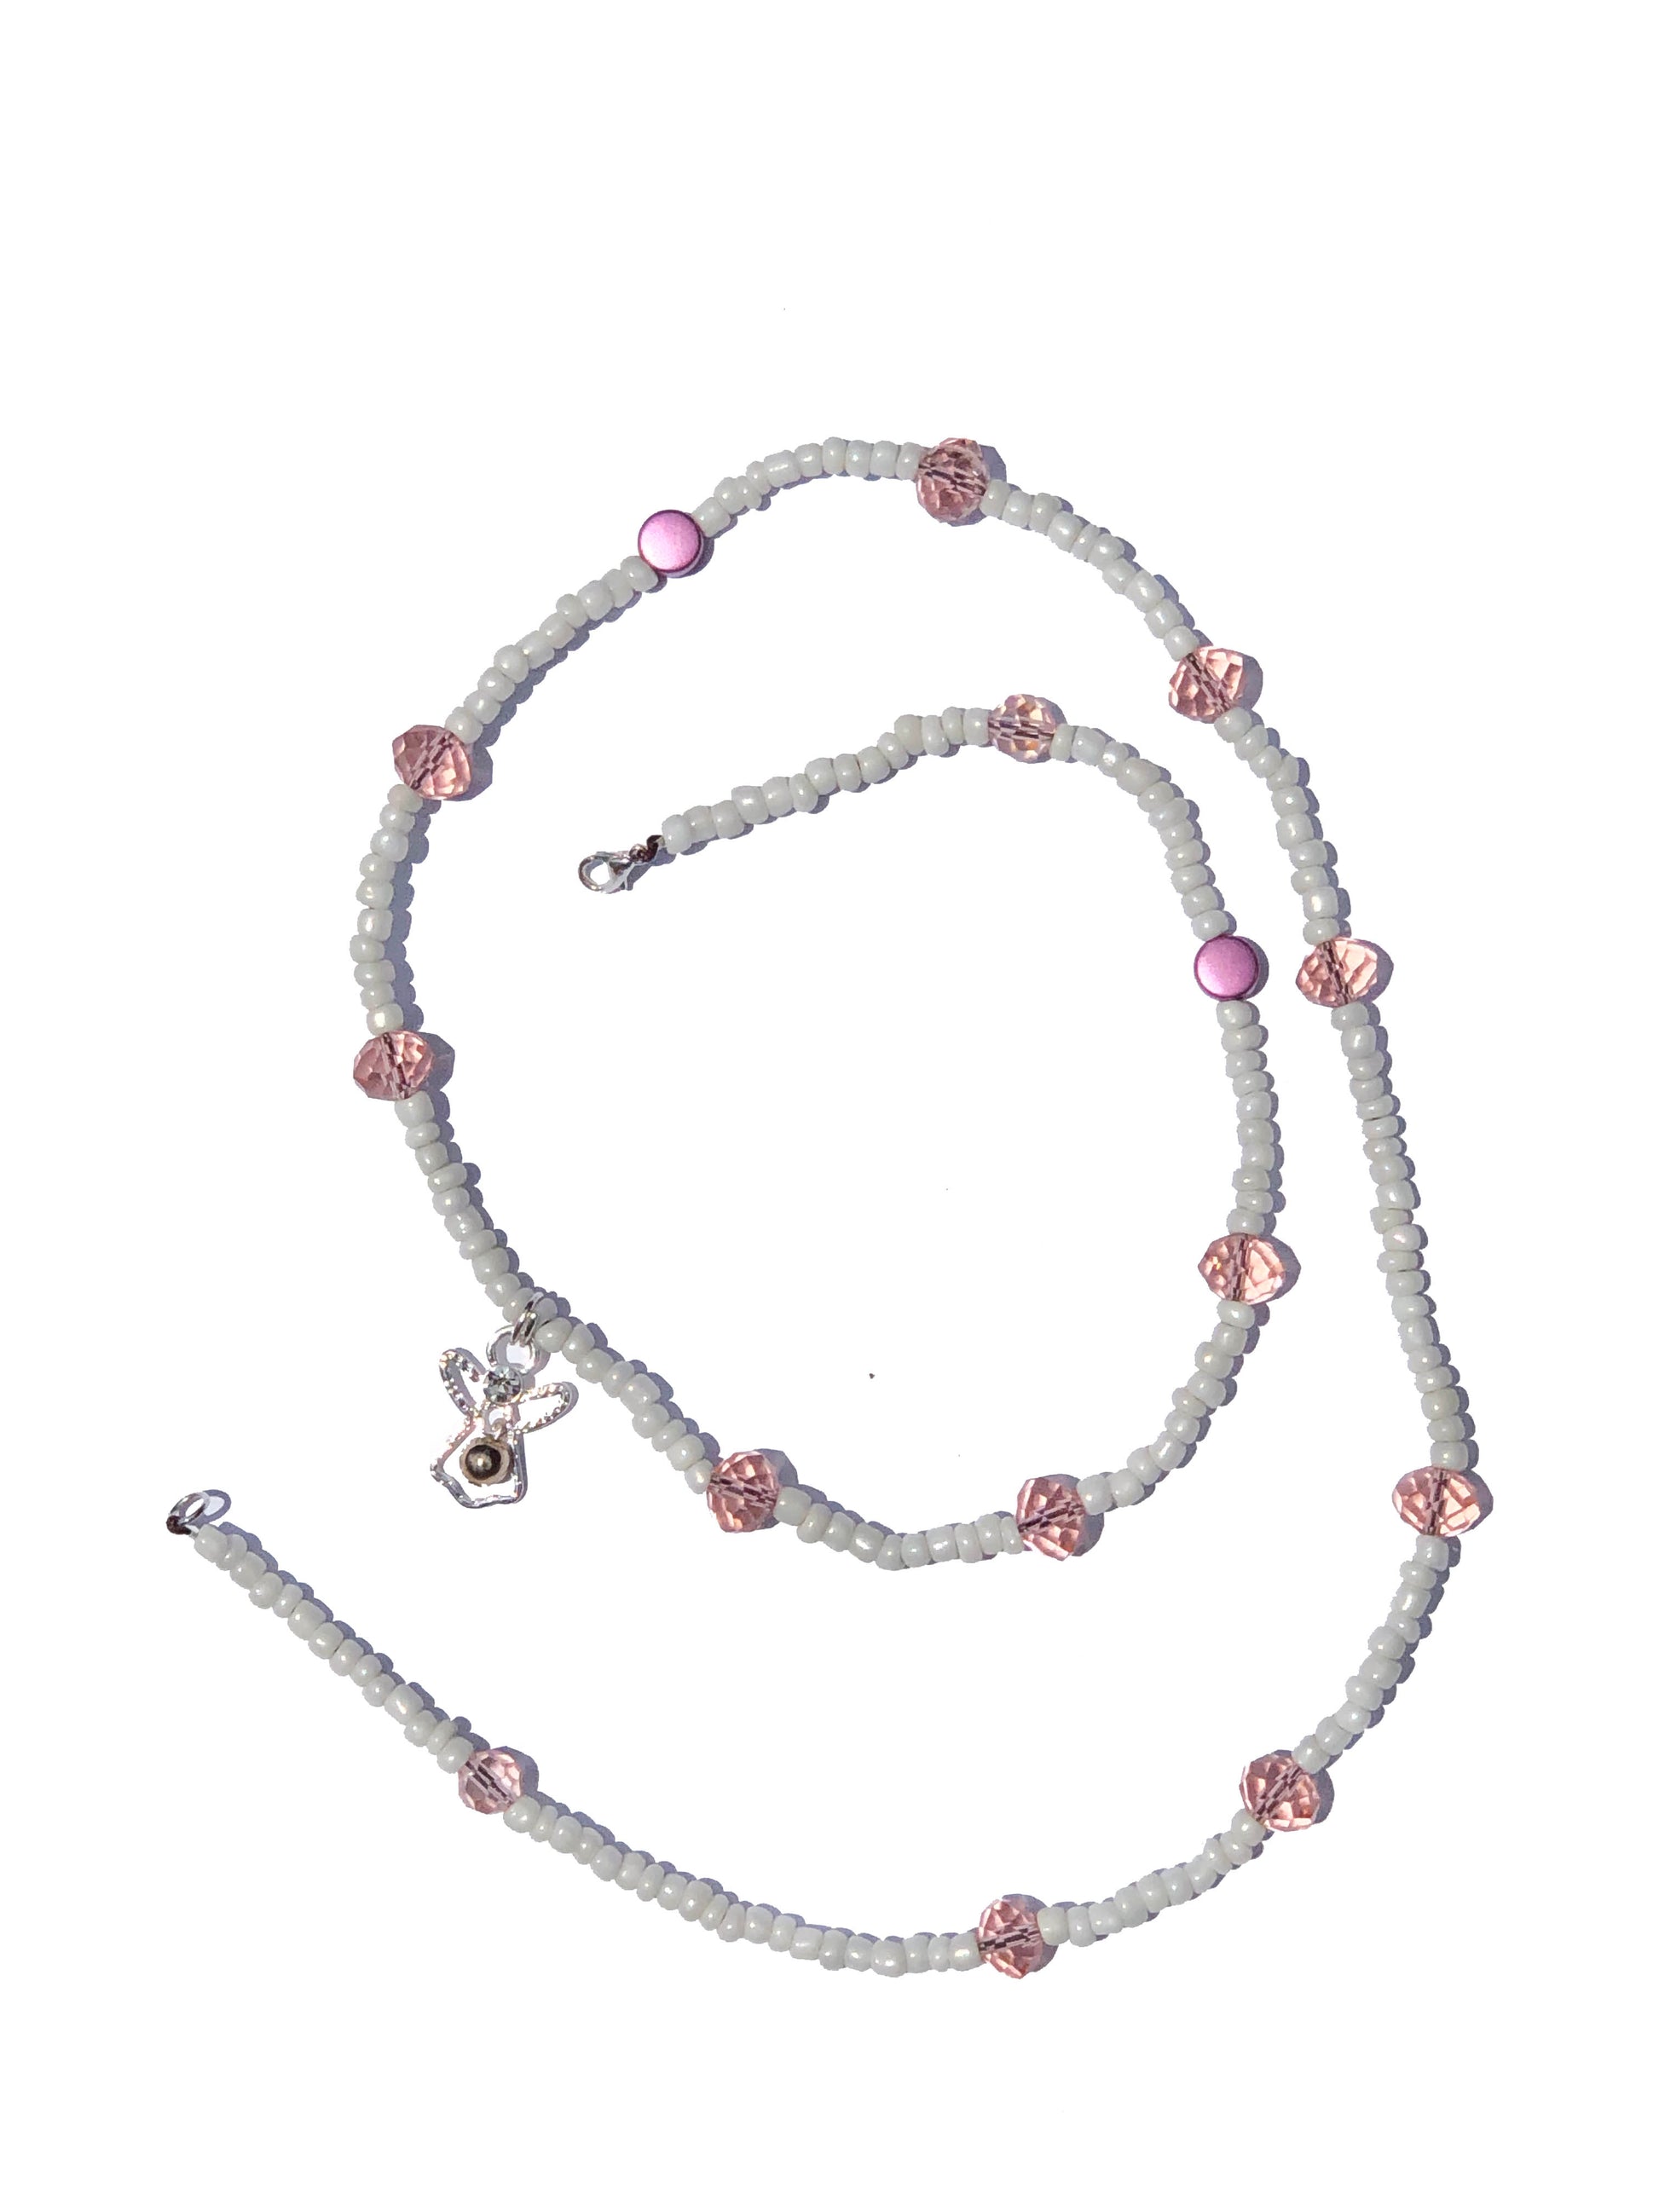 White glass beads with large light pink crystal and circle beads, handcrafted into a belly chain with silver angel charm